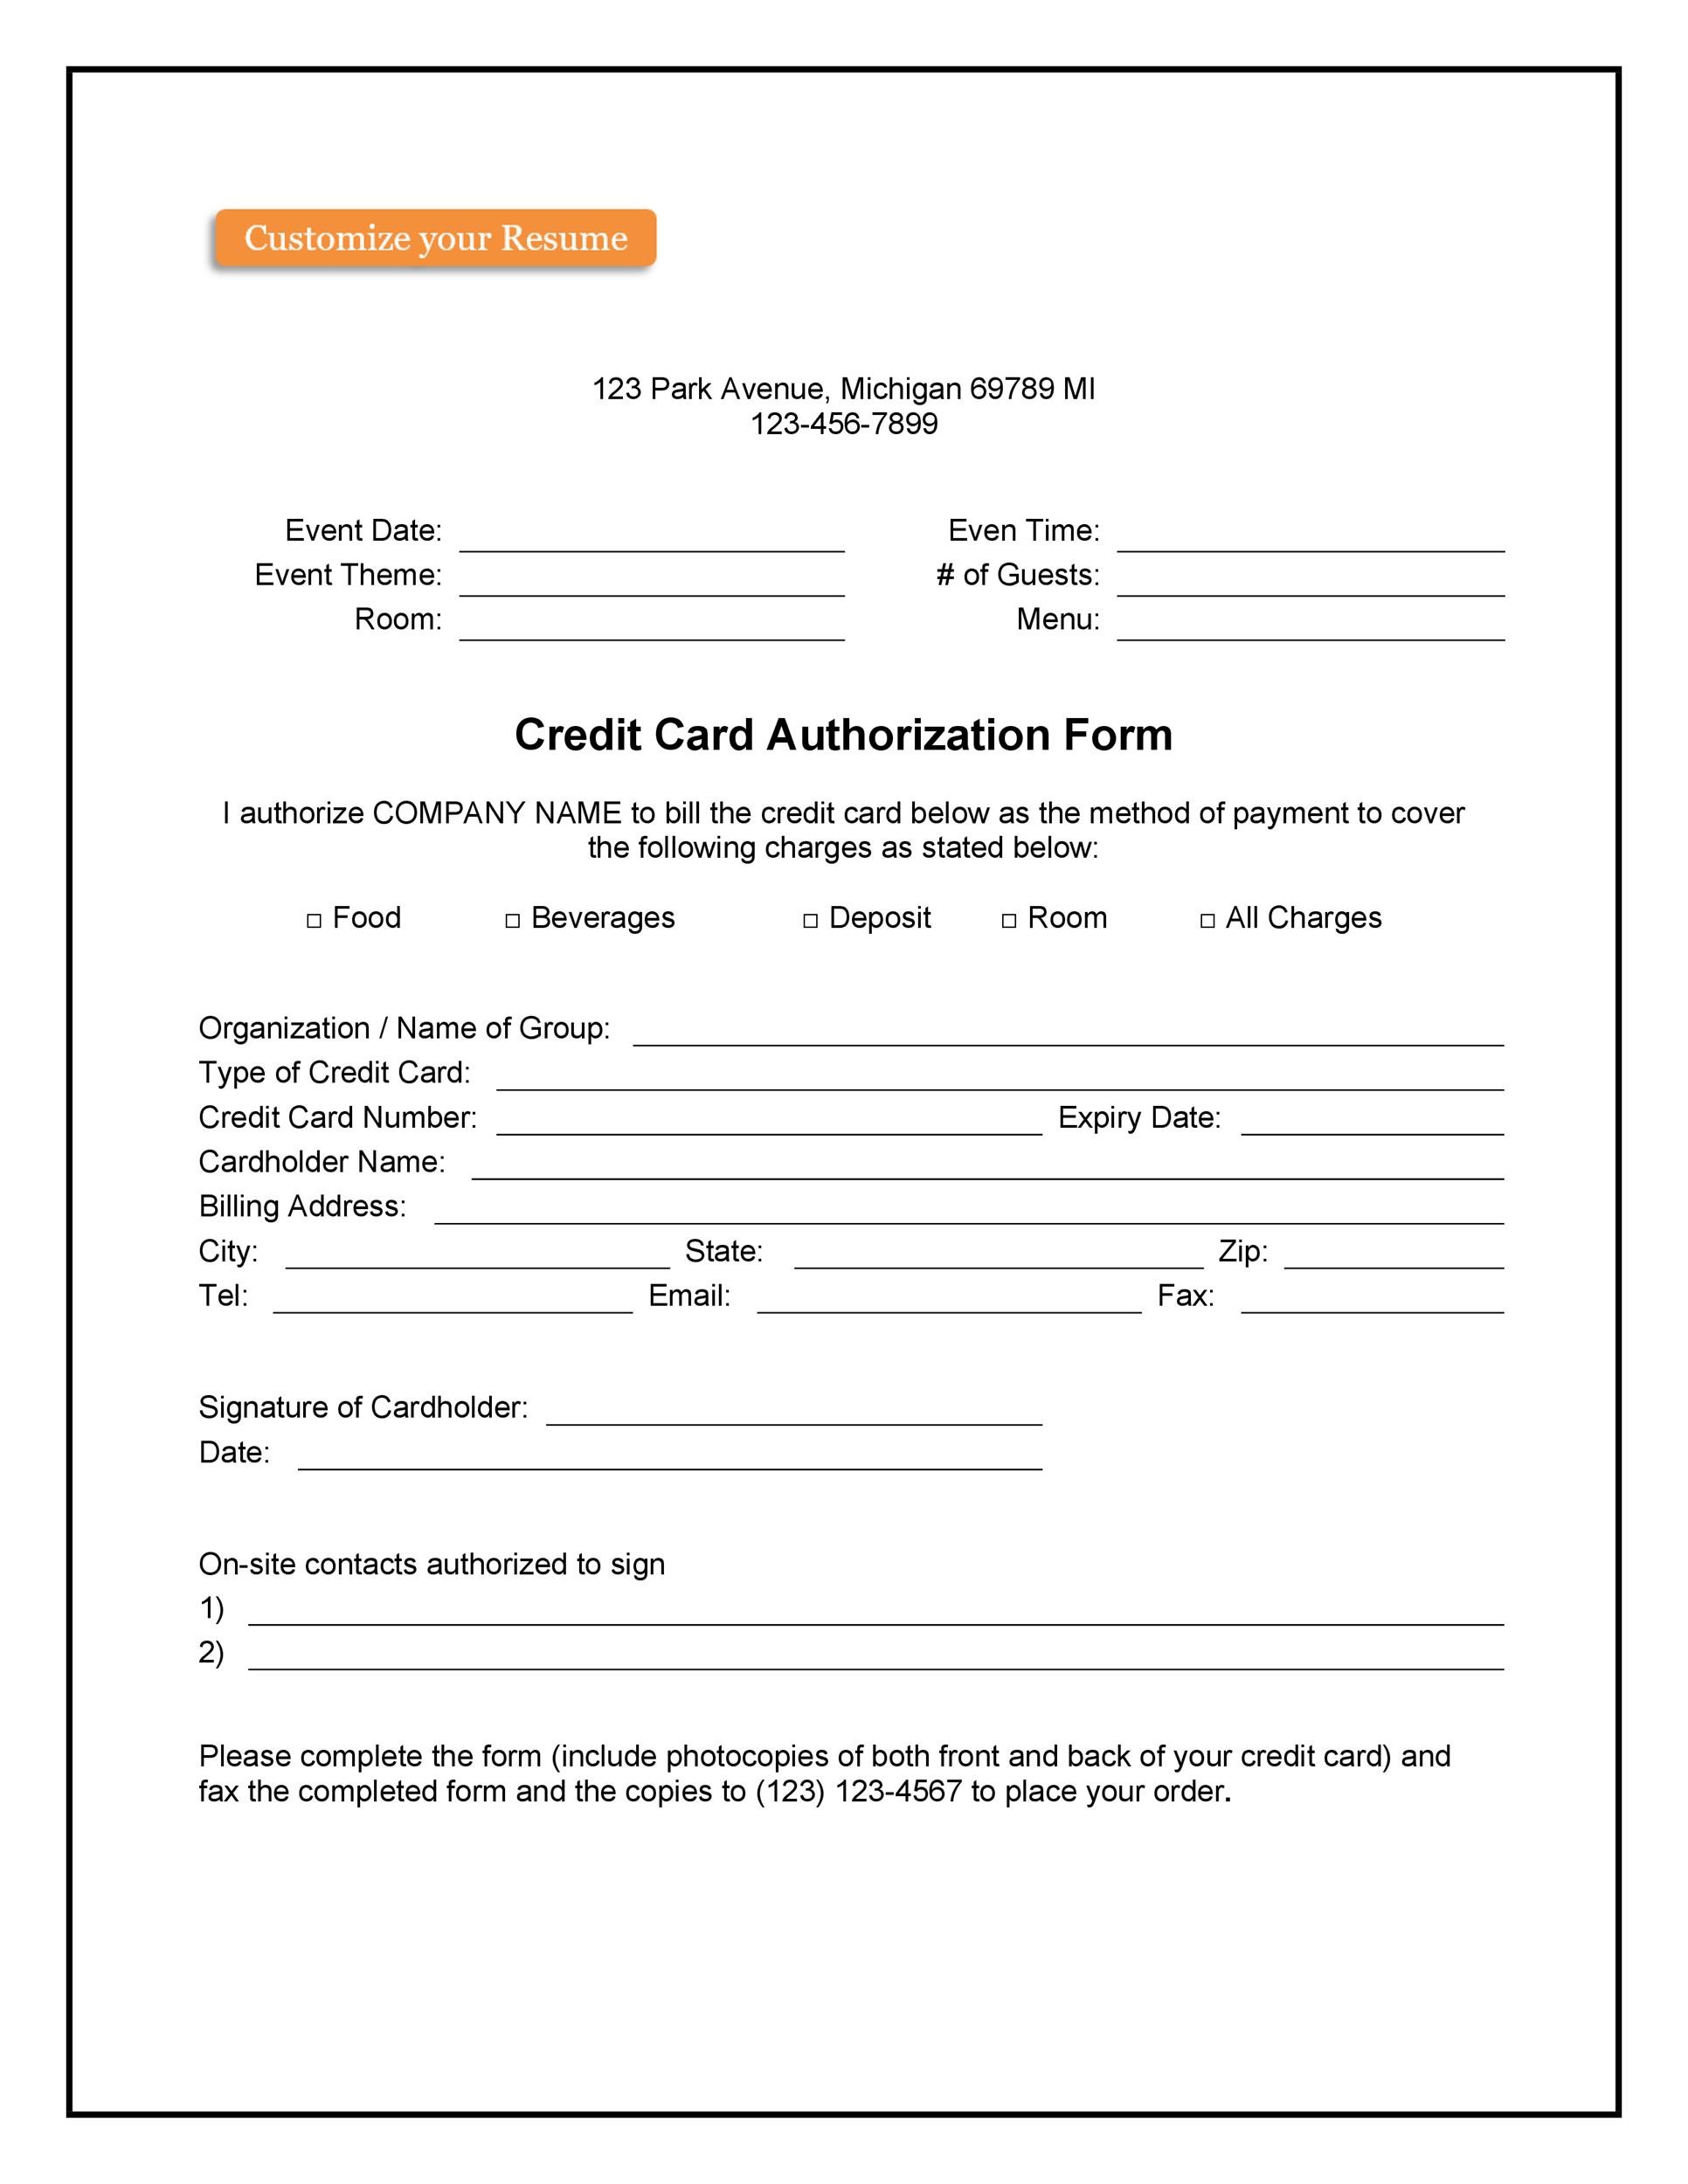 41 Credit Card Authorization Forms Templates Ready To Use 5436